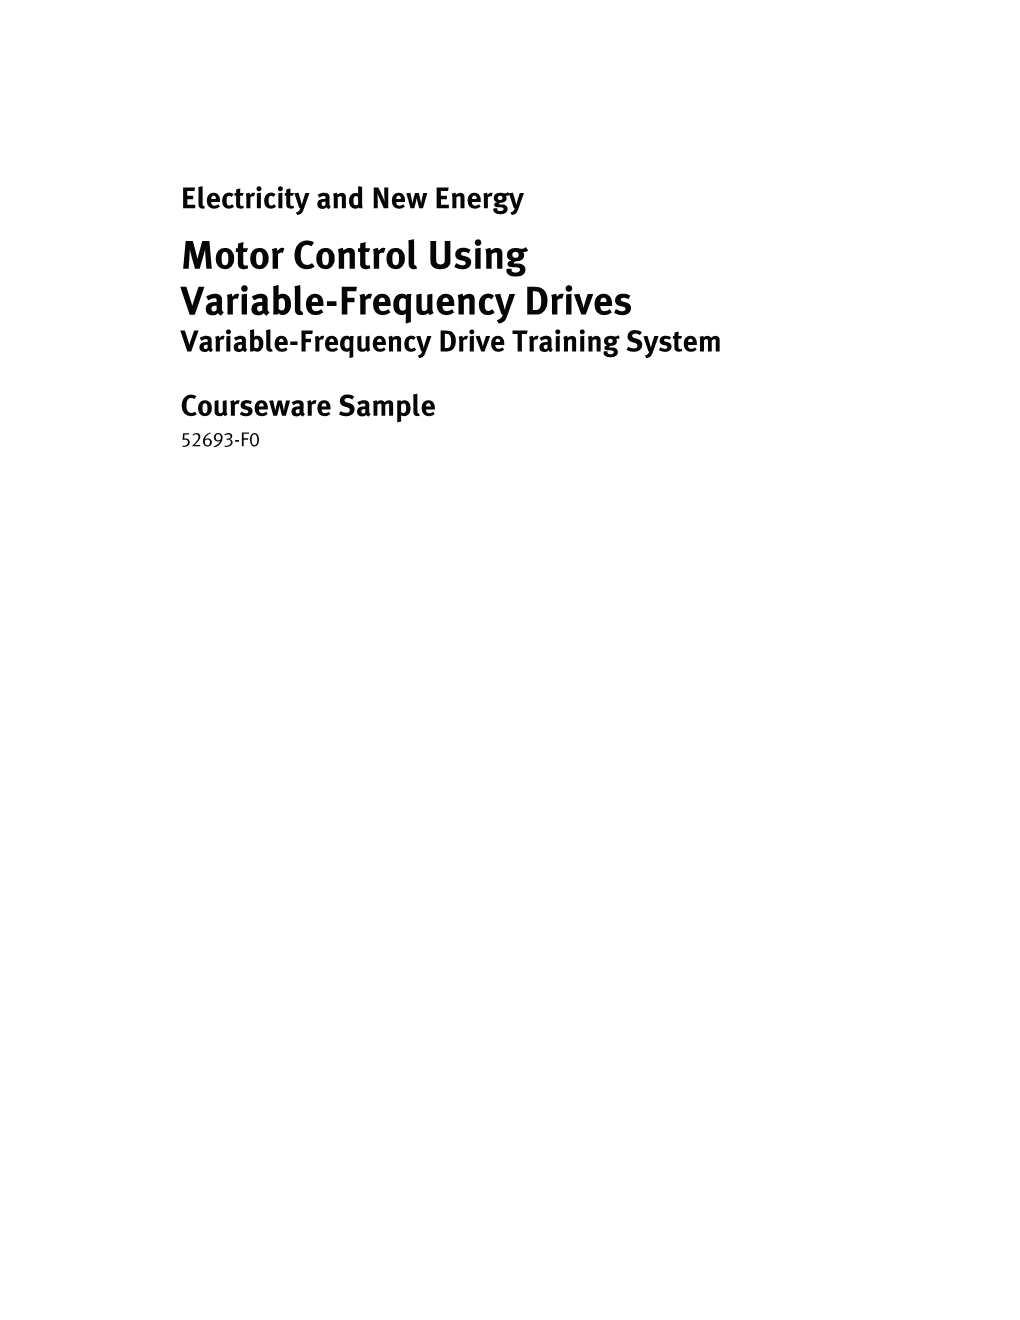 Motor Control Using Variable-Frequency Drives